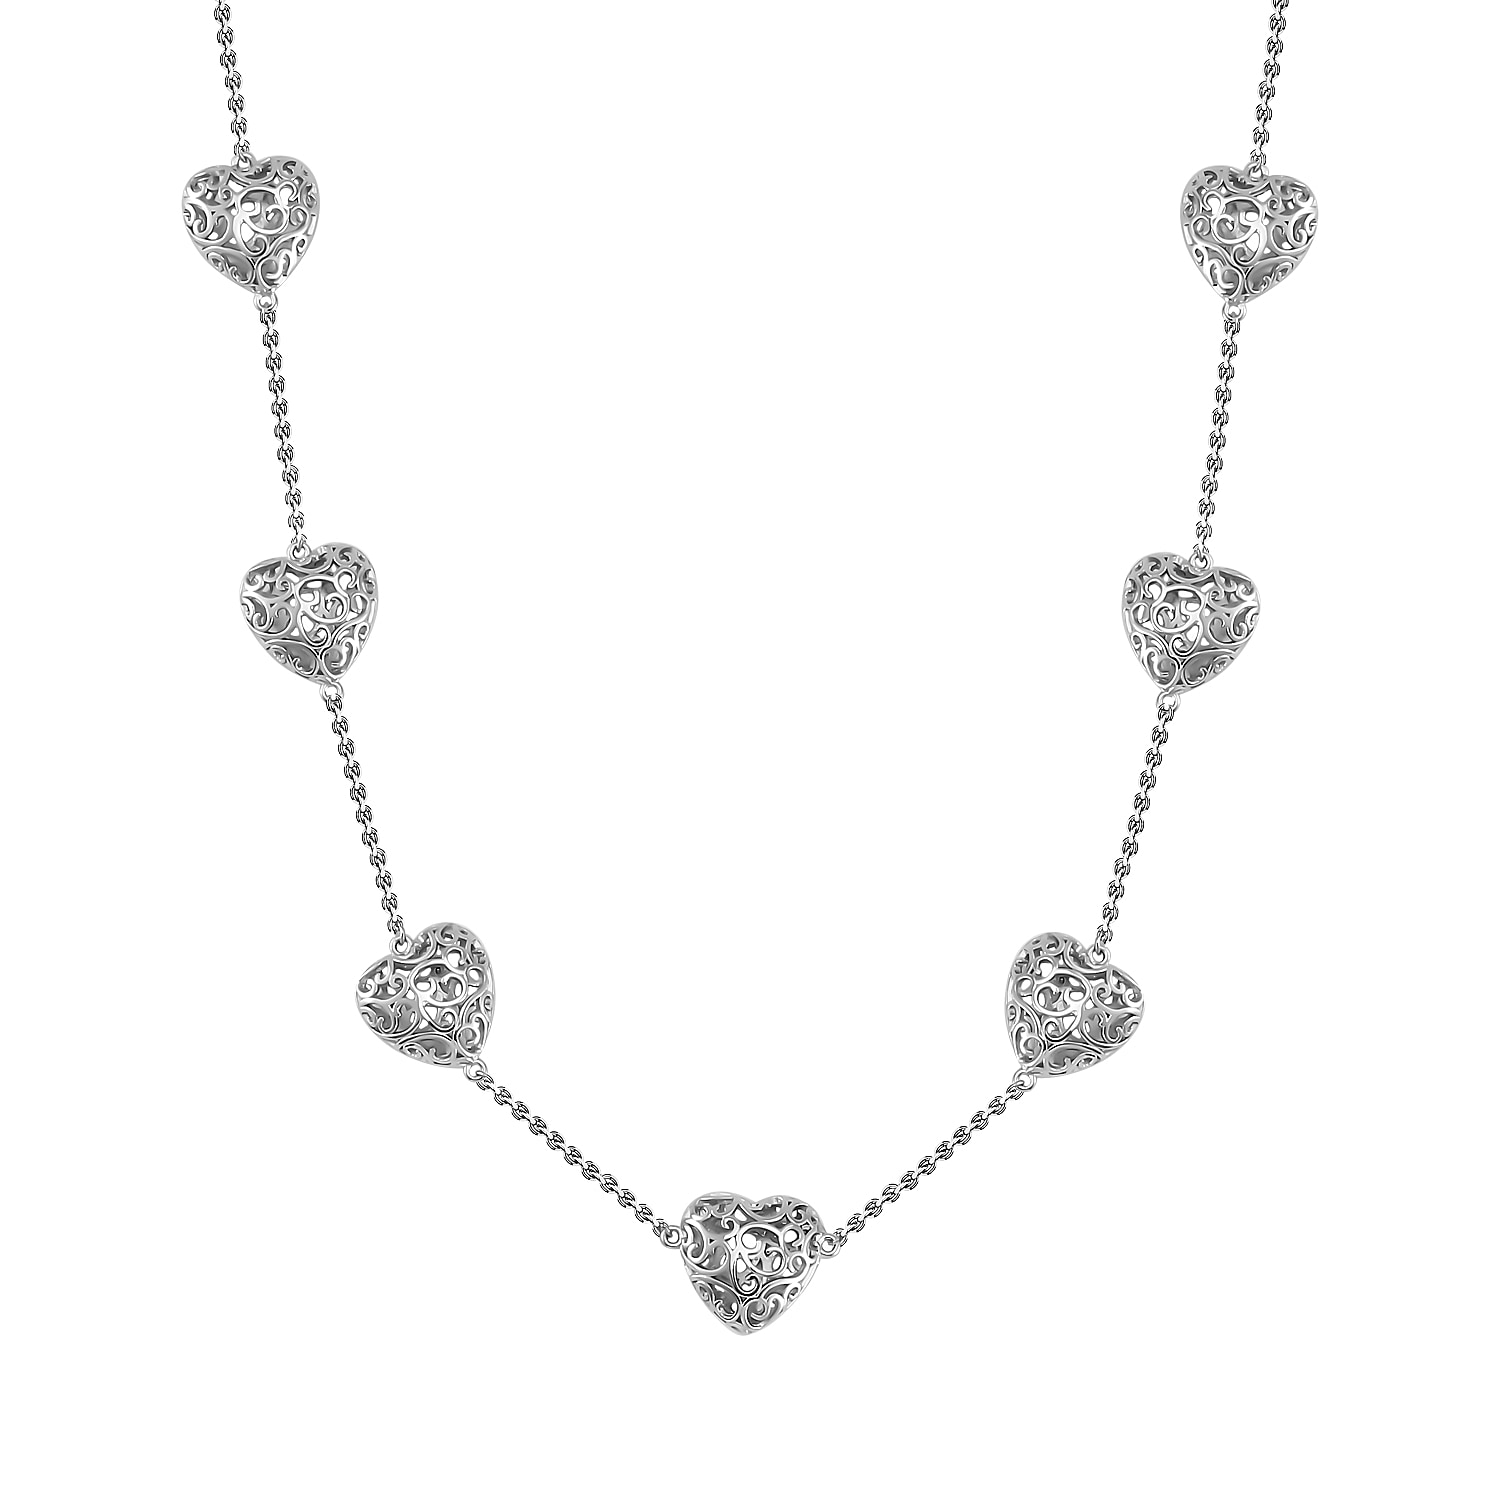 Lucy Q Amore Heart Collection - Rhodium Overlay Sterling Silver Adjustable Necklace (Size 18-2), Silver Wt. 16 Gms